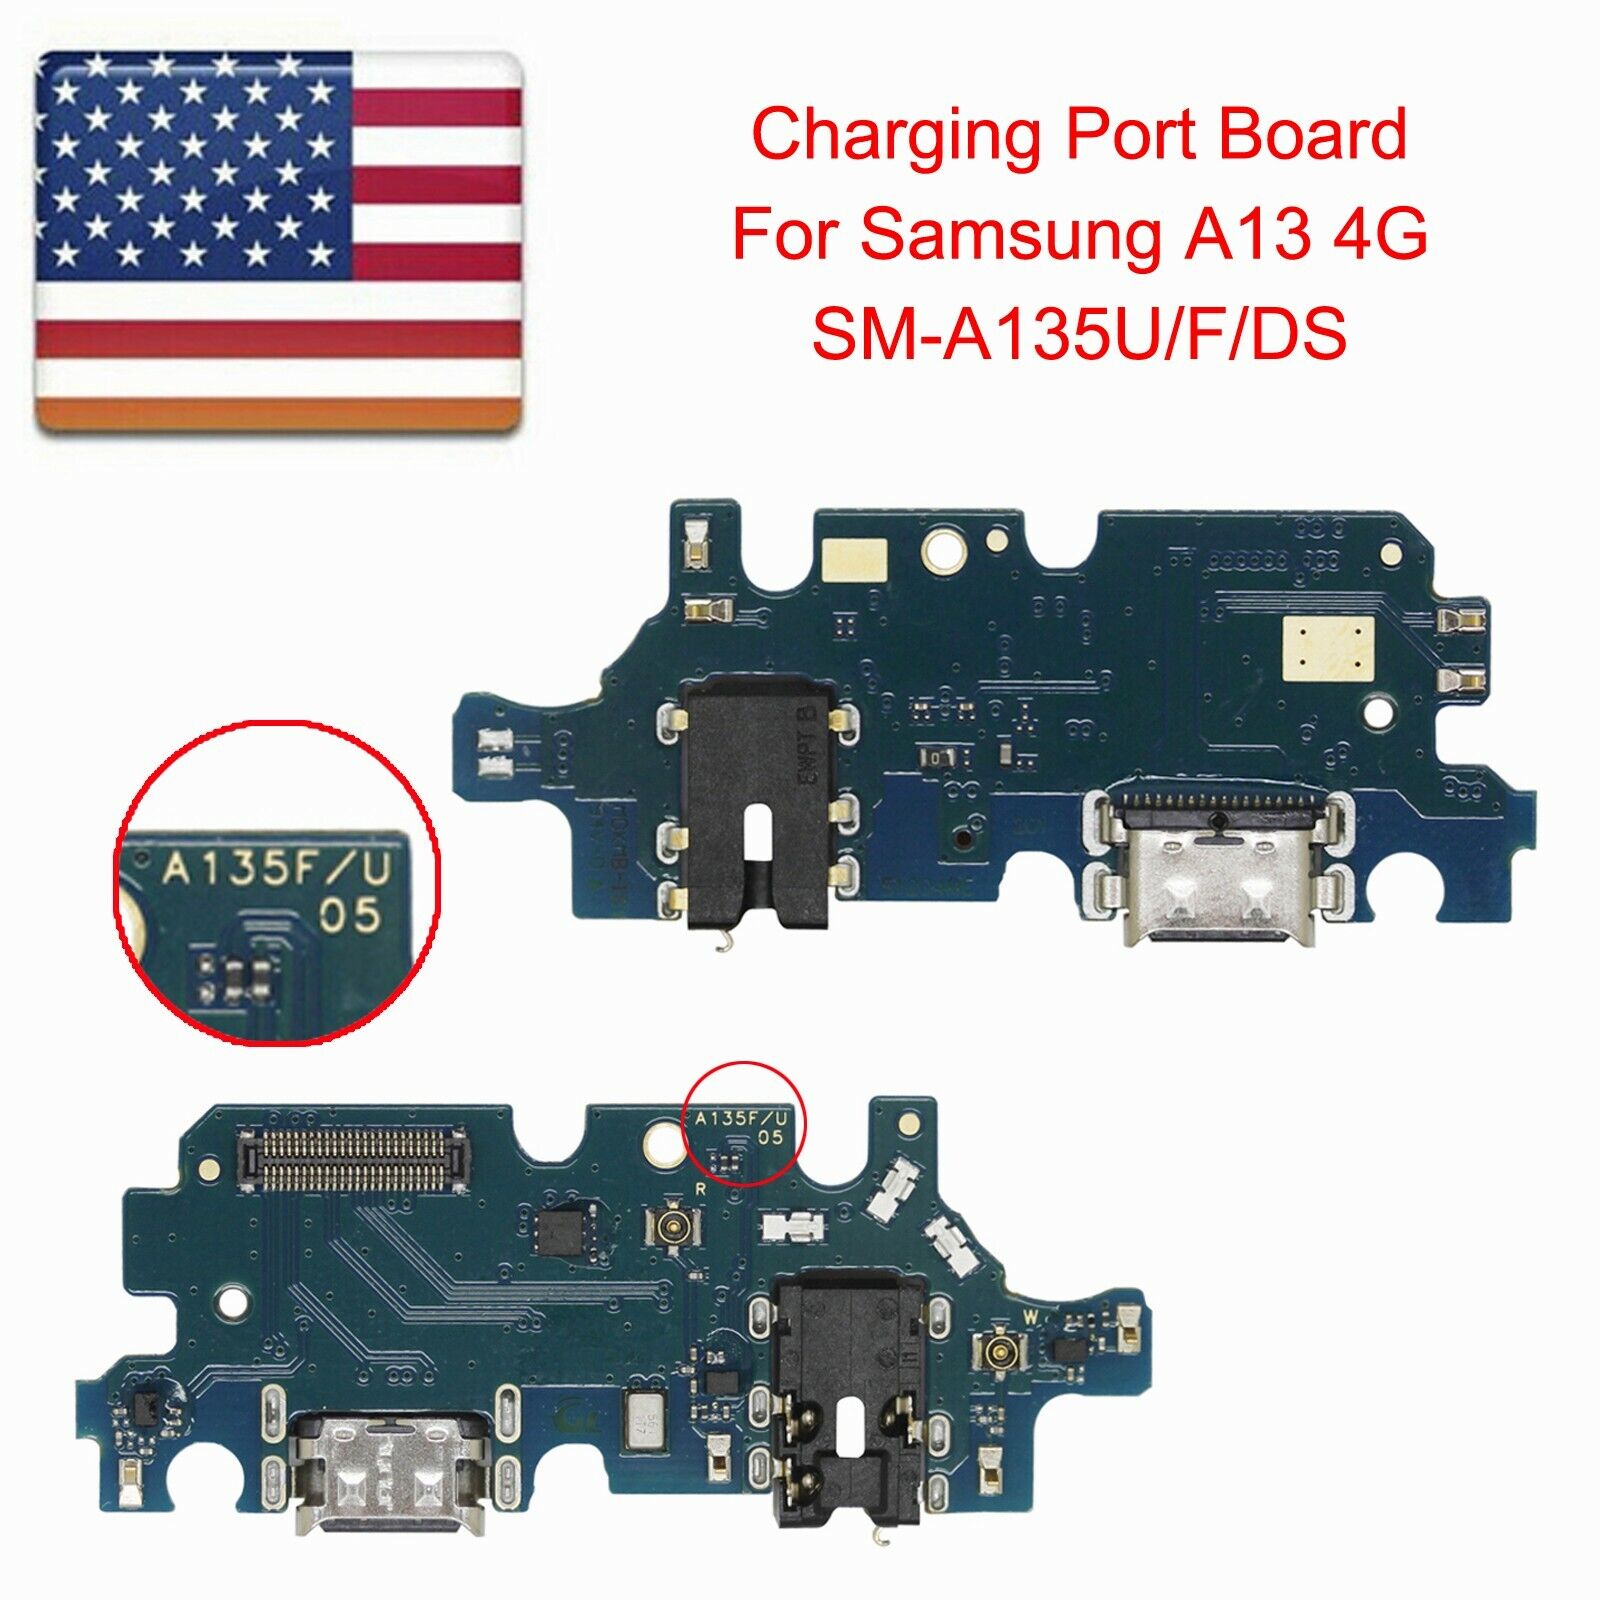 CHARGER BOARD A13 4G SM-A135U/F/DS